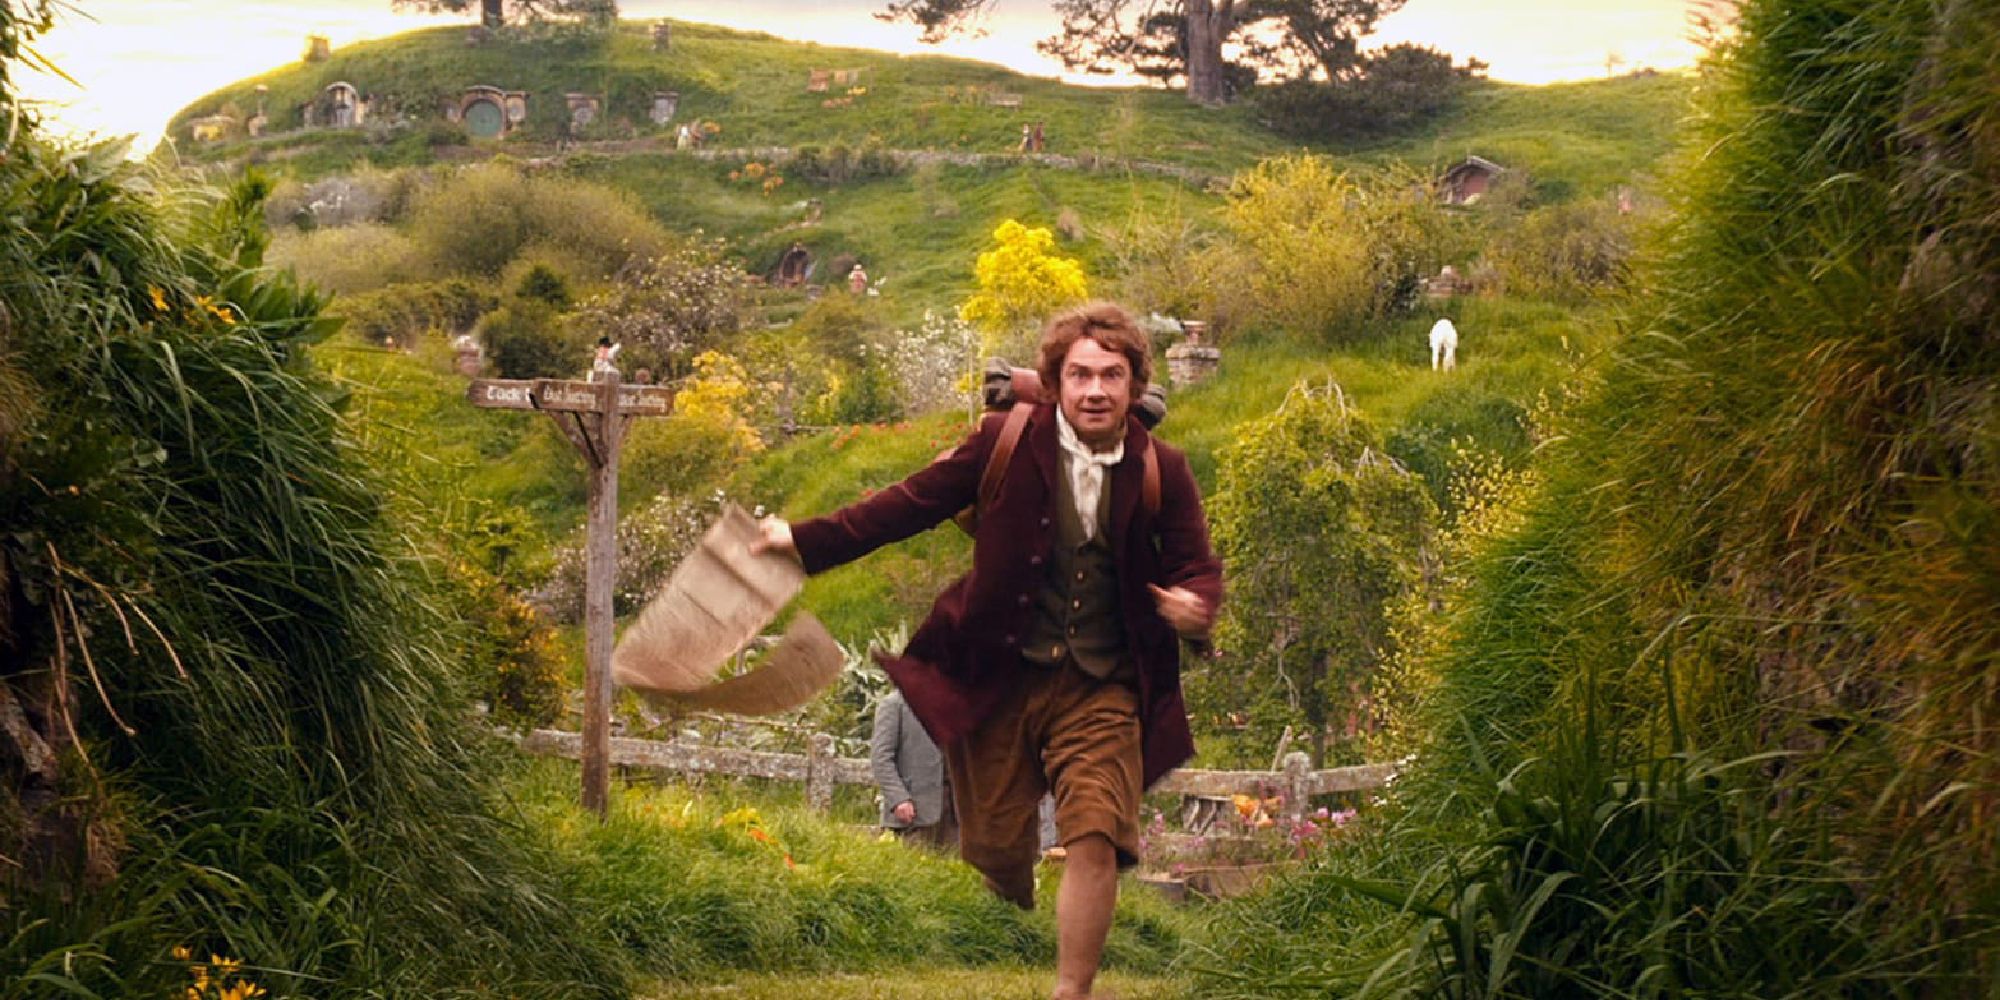 Bilbo races through the shire with his contract in hand, trying to catch up to the dwarves to embark on their quest